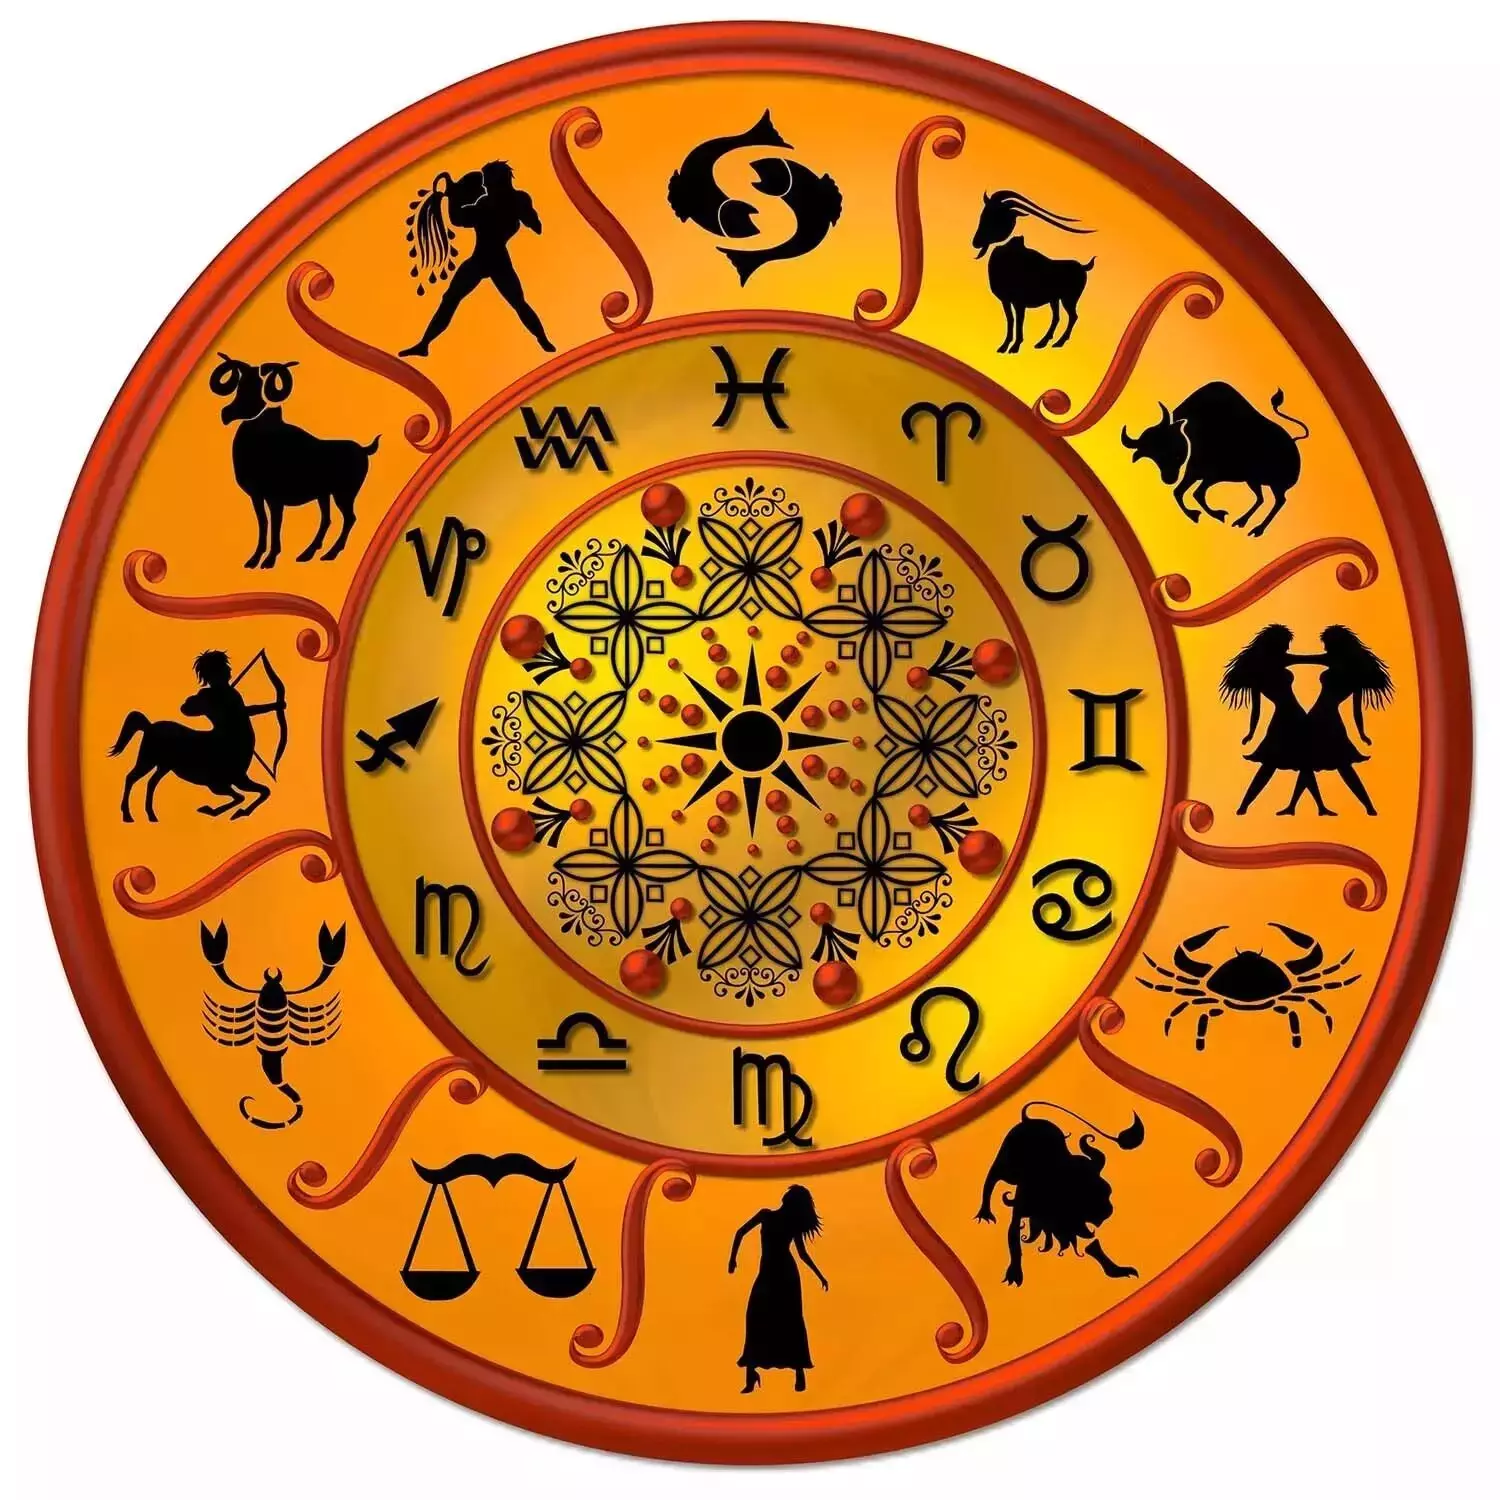 20 February – Know Your Todays Horoscope